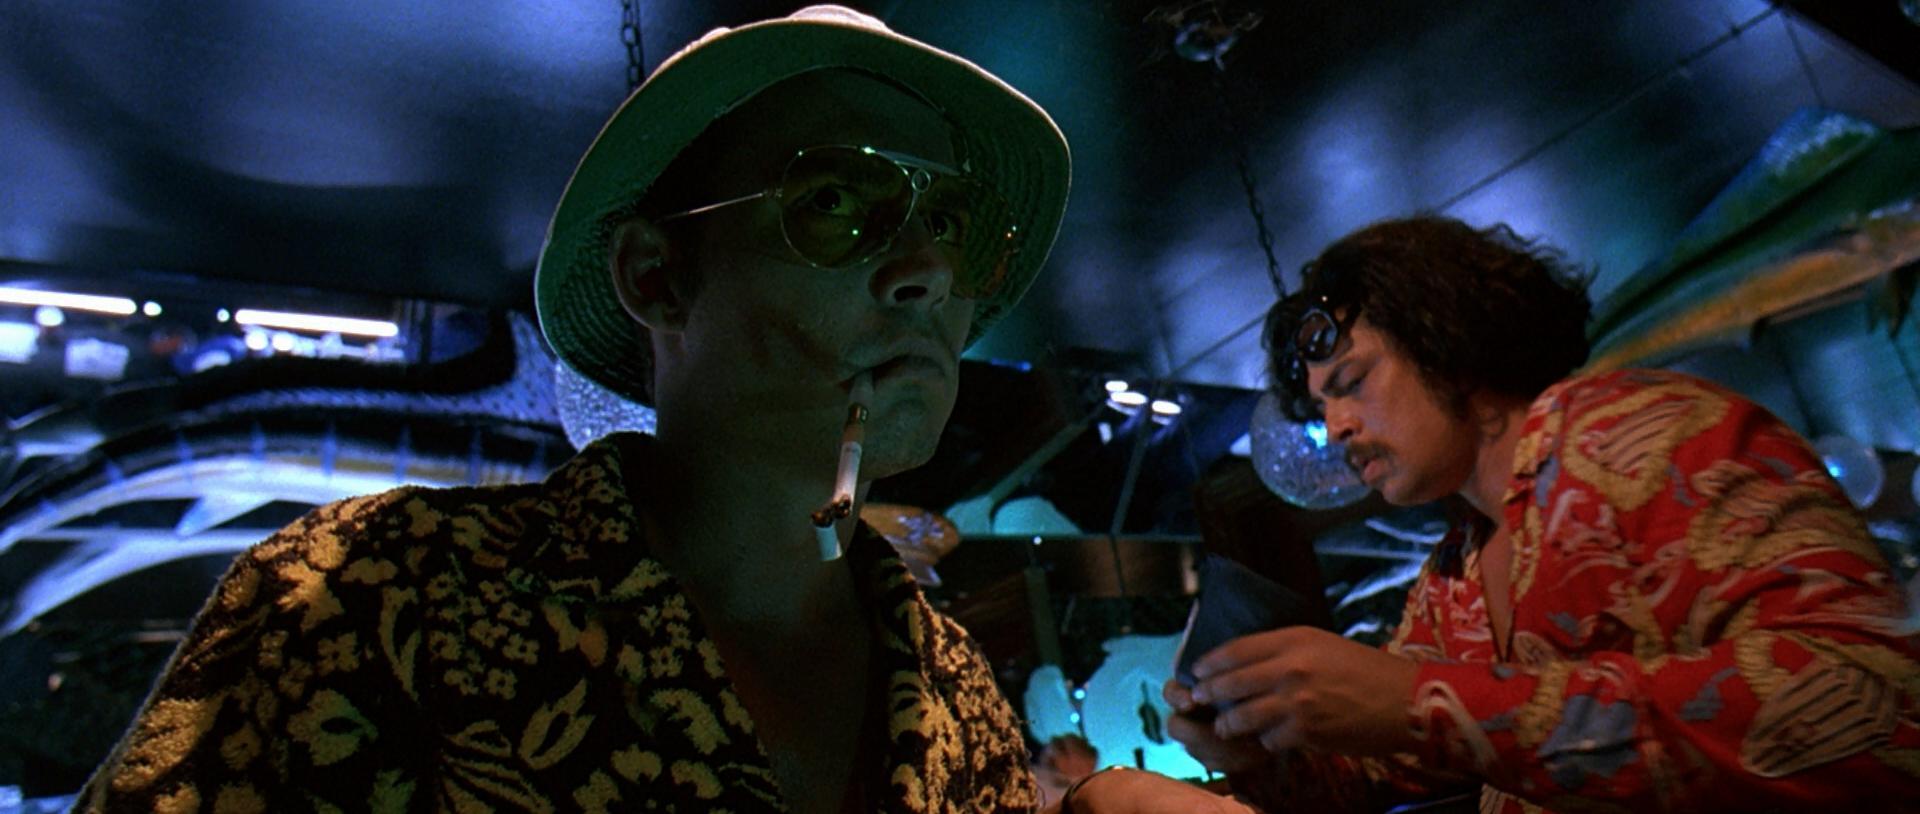 Image gallery for Fear and Loathing in Las Vegas - FilmAffinity